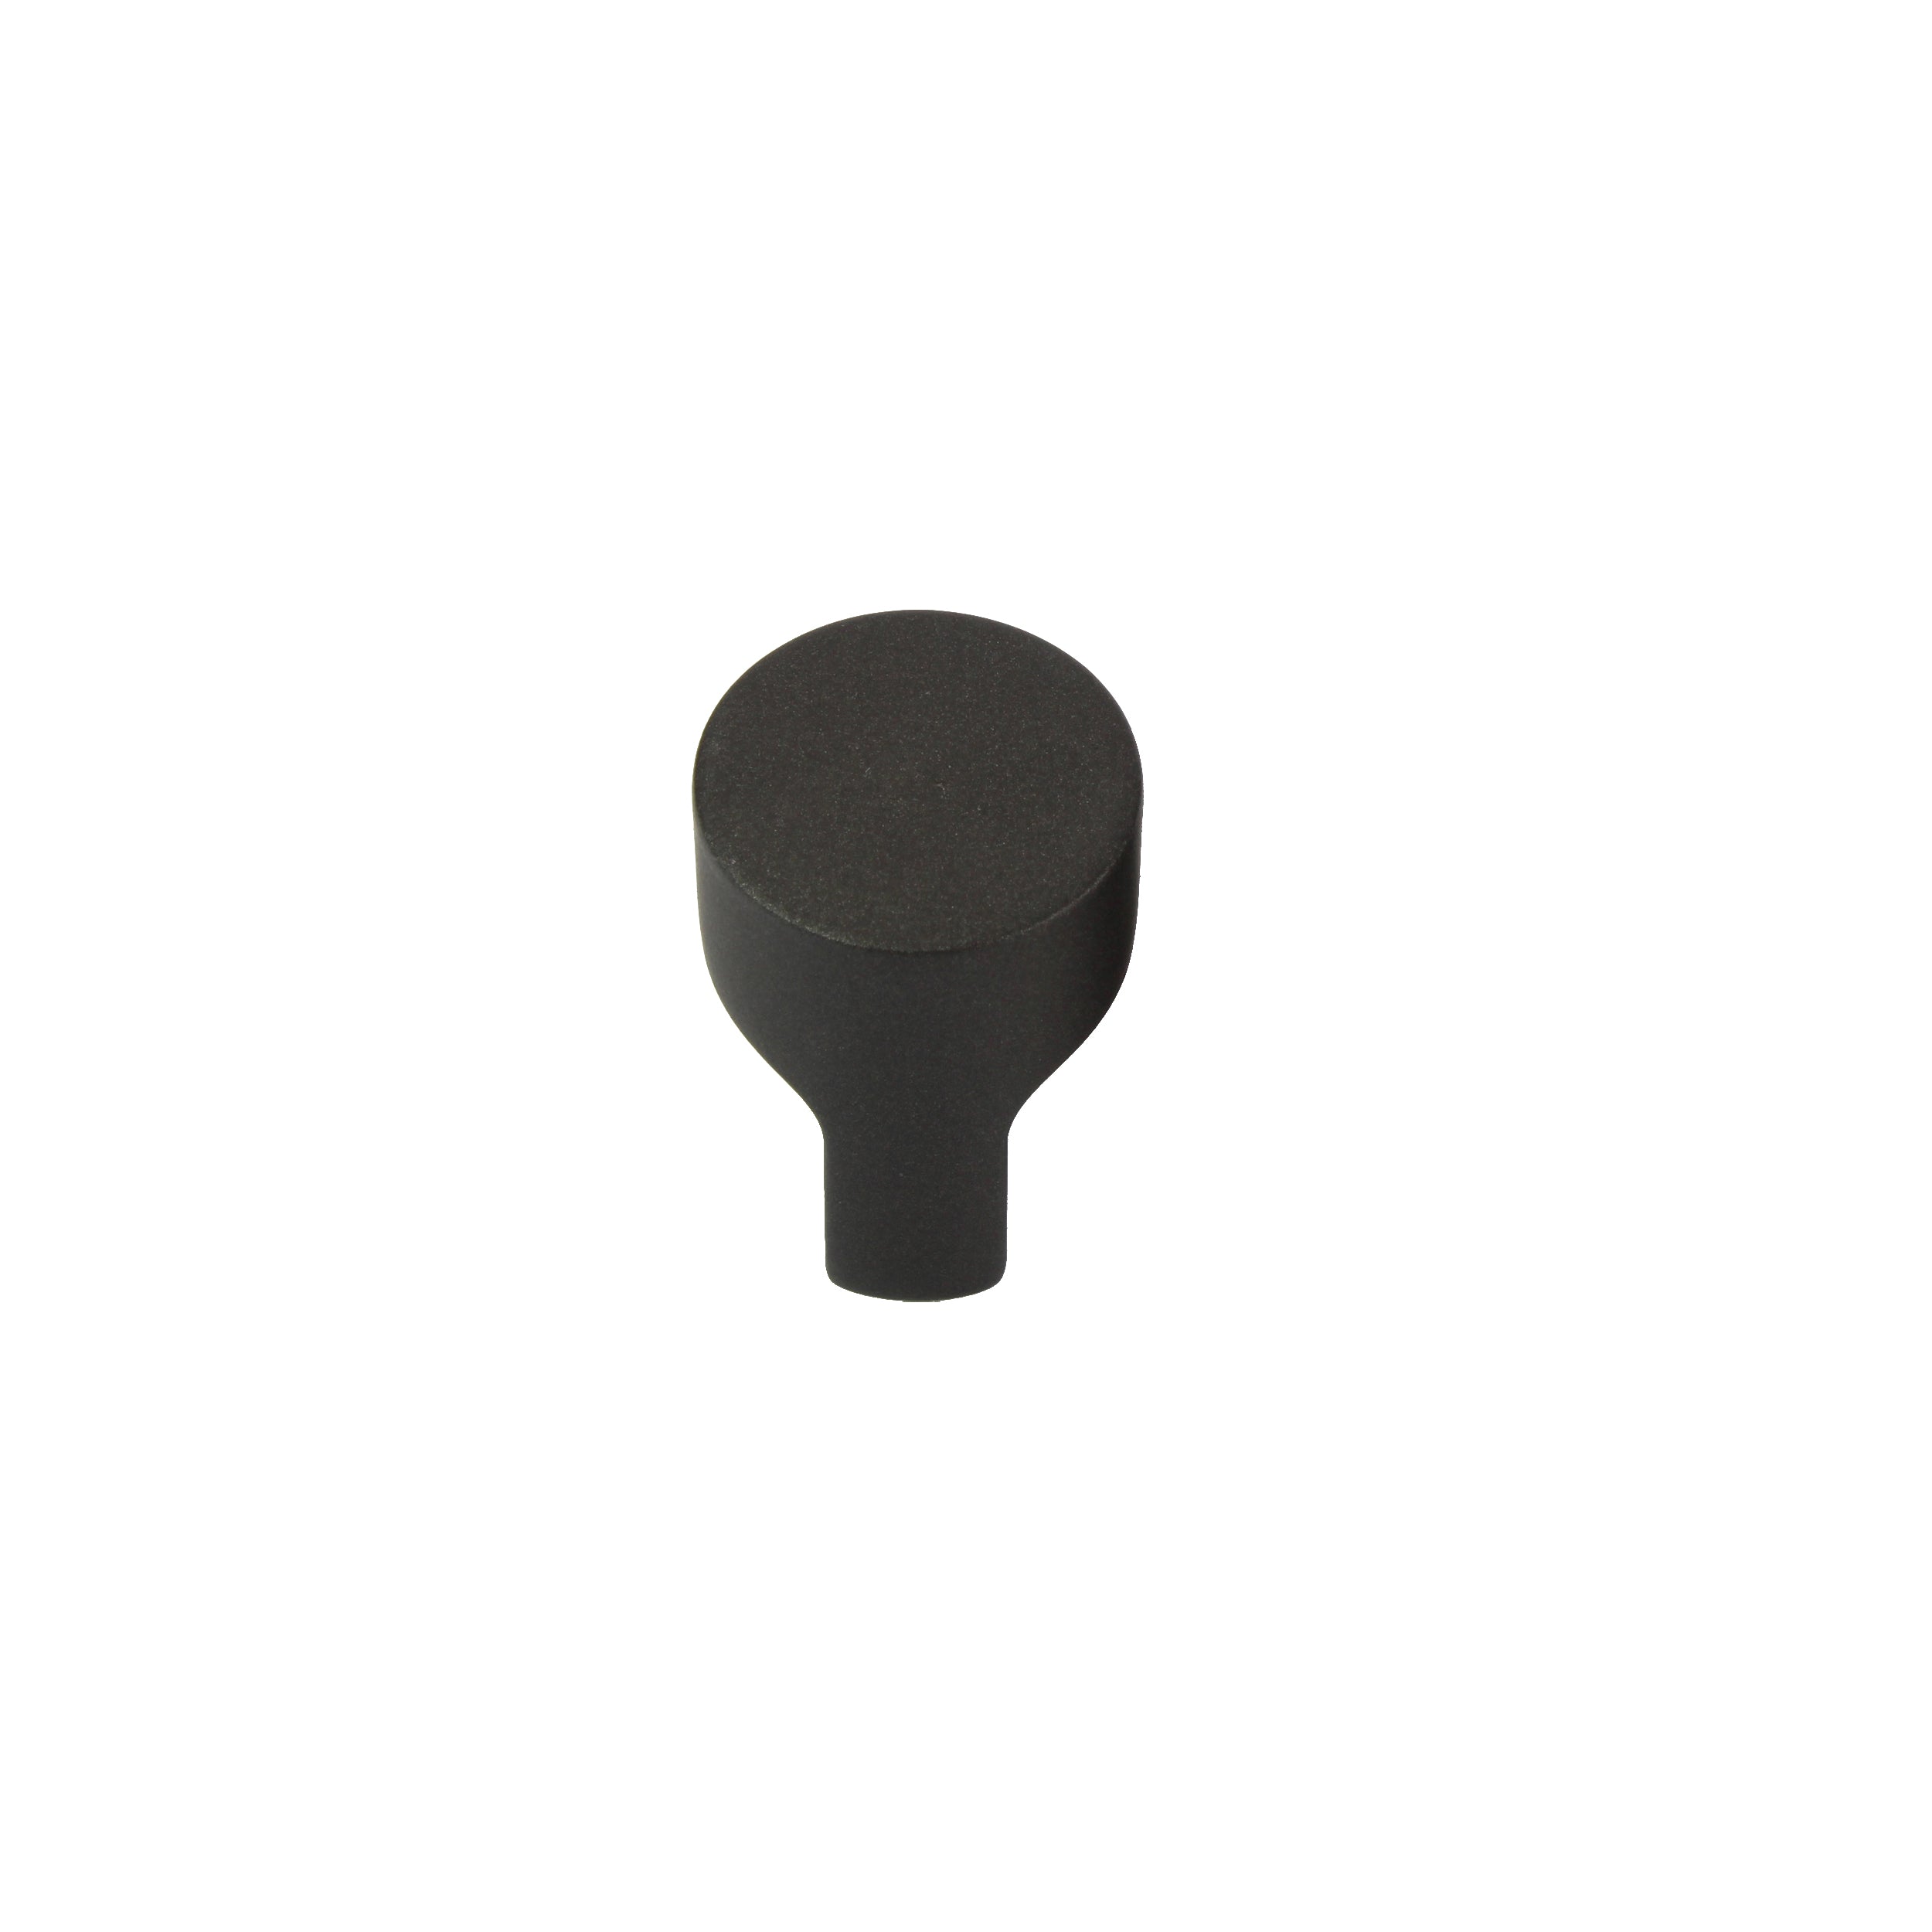 Furniture handle button